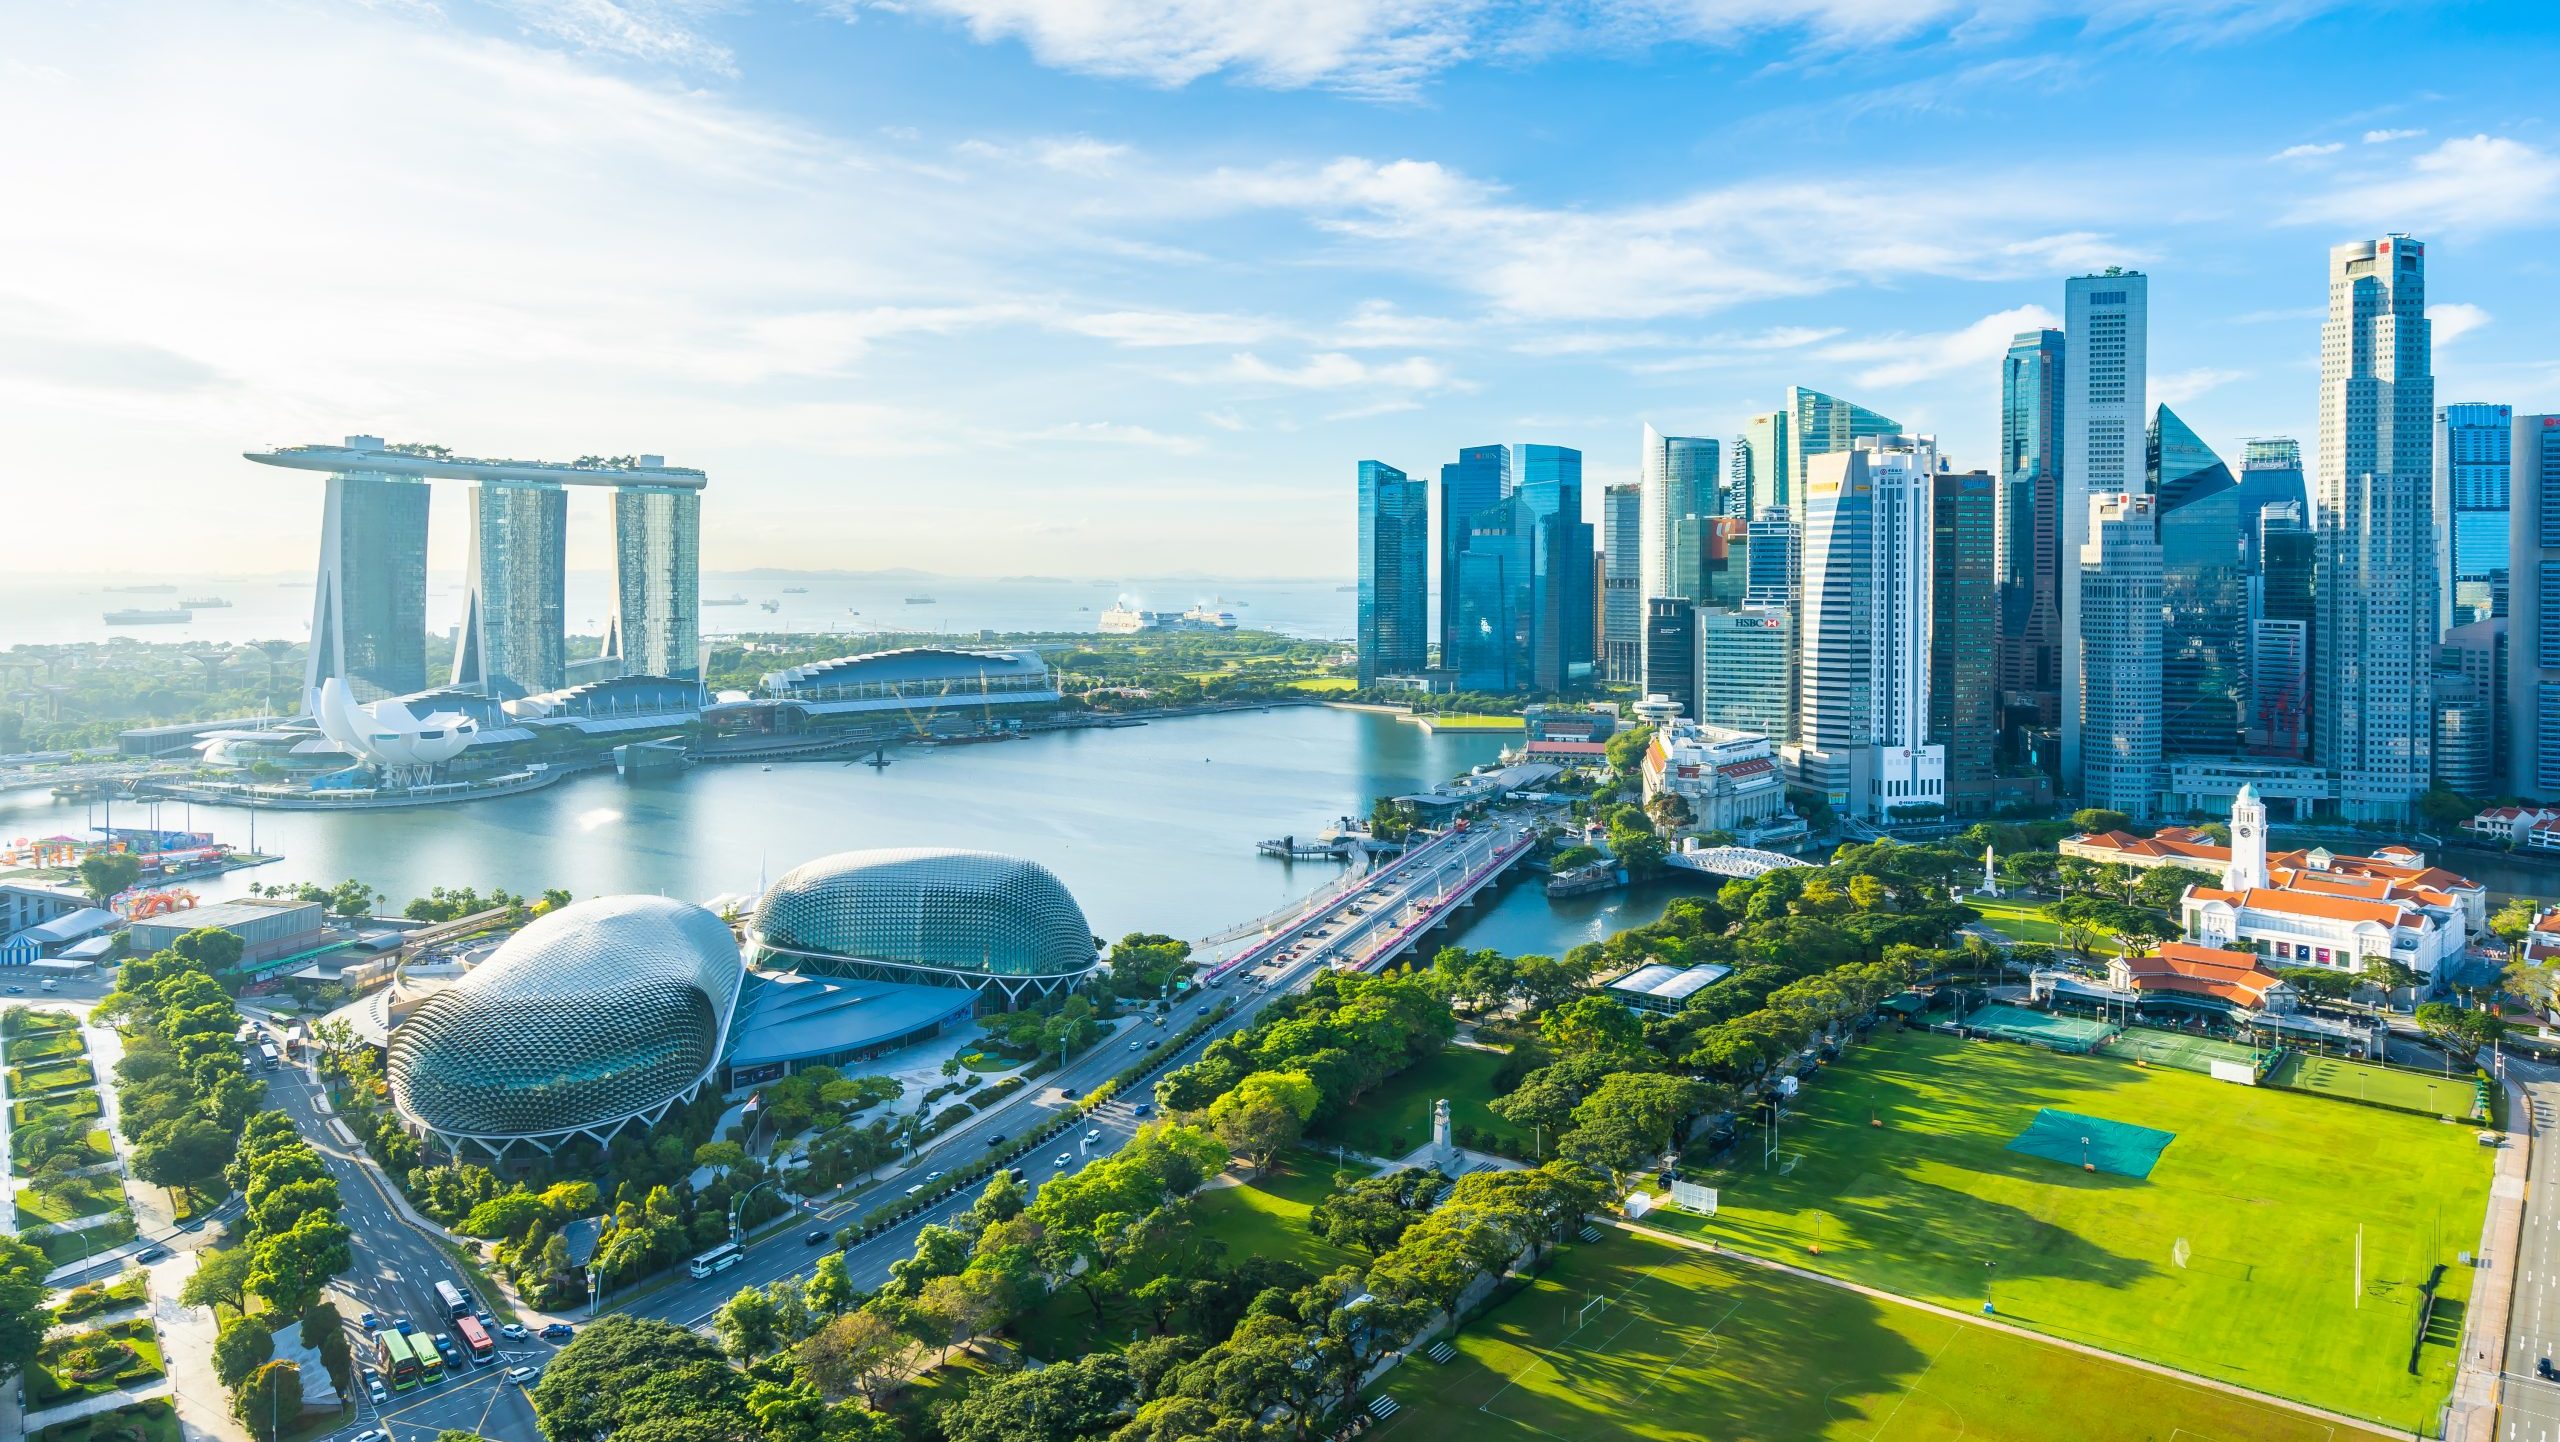 Number of millionaires in Singapore soars by over 60%, making SG the 4th wealthiest nation in the world